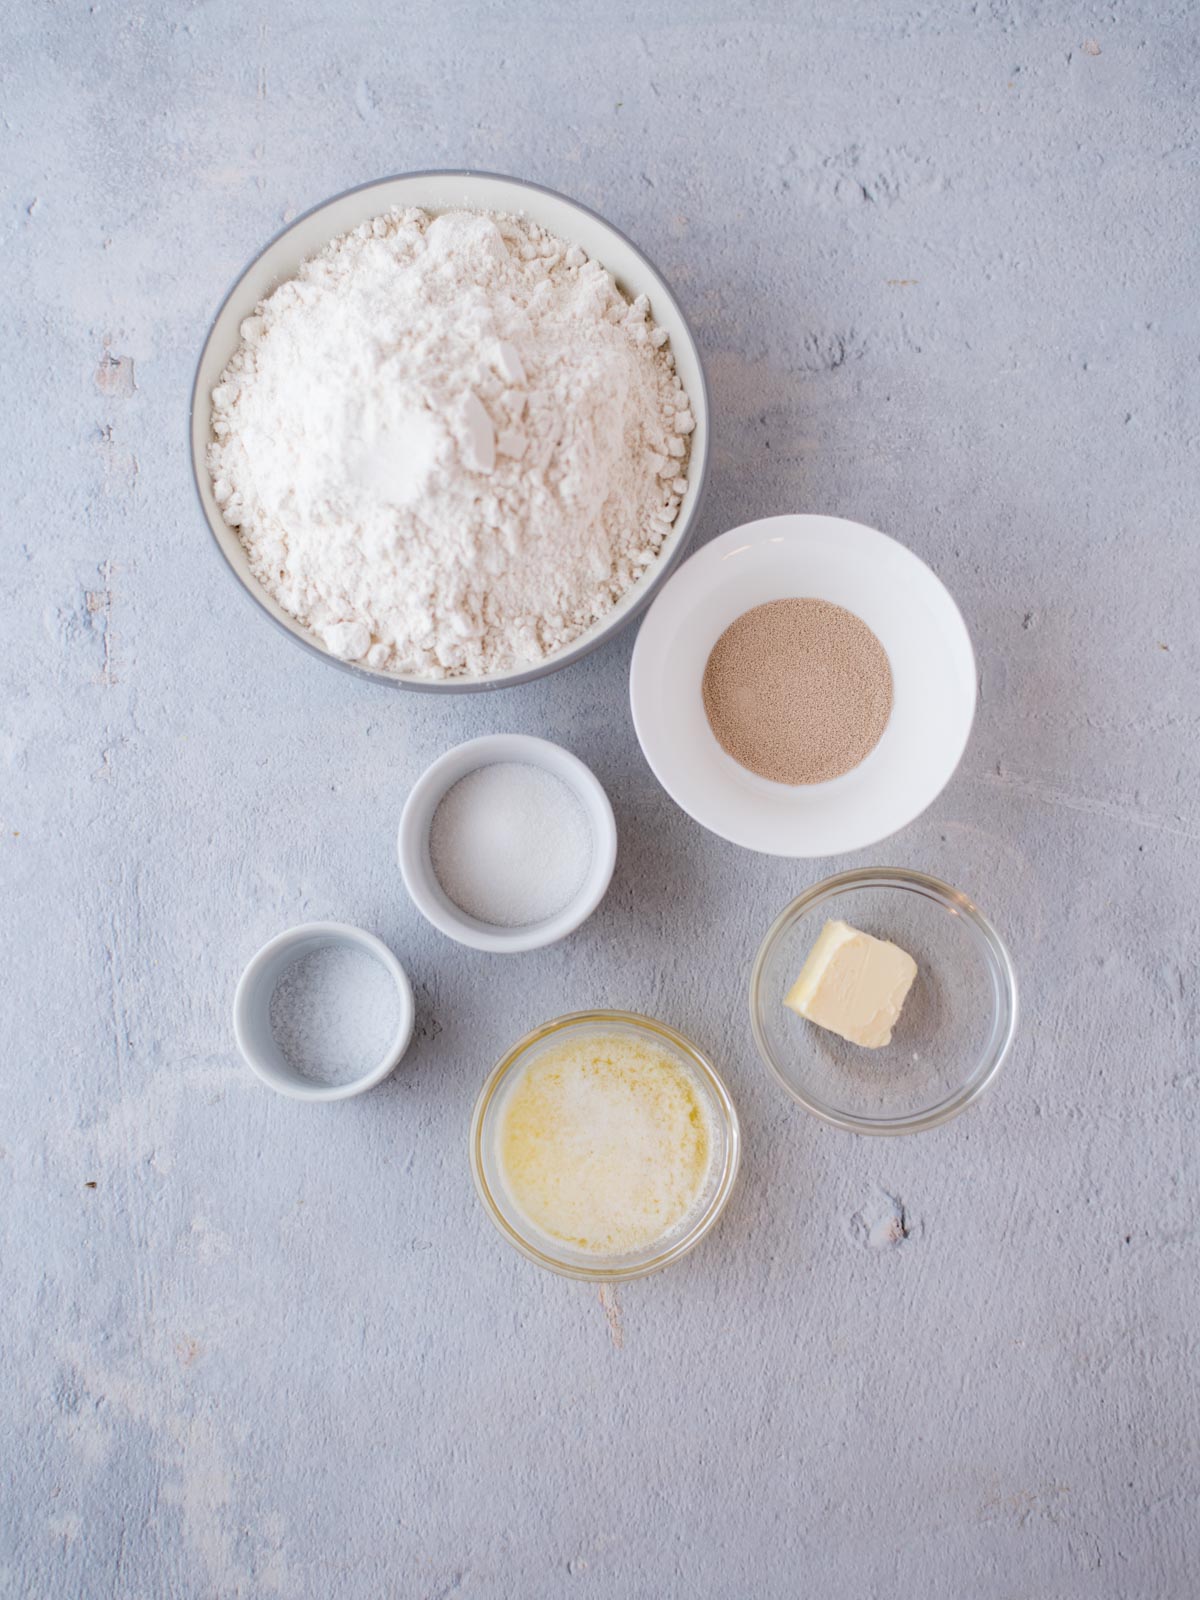 ingredients for homemade yeast rolls in bowls